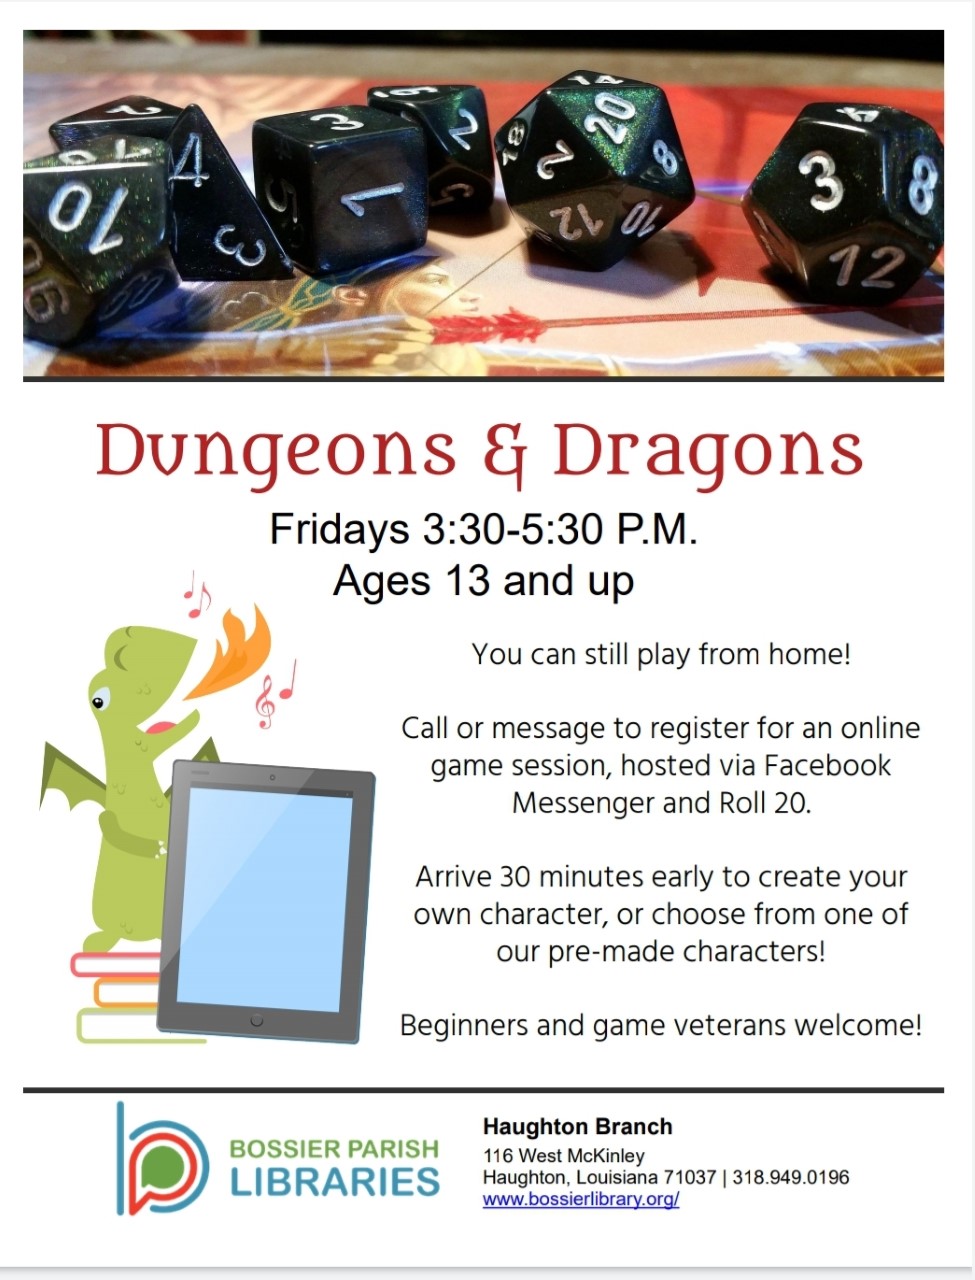 Flyer for dungeons and dragons